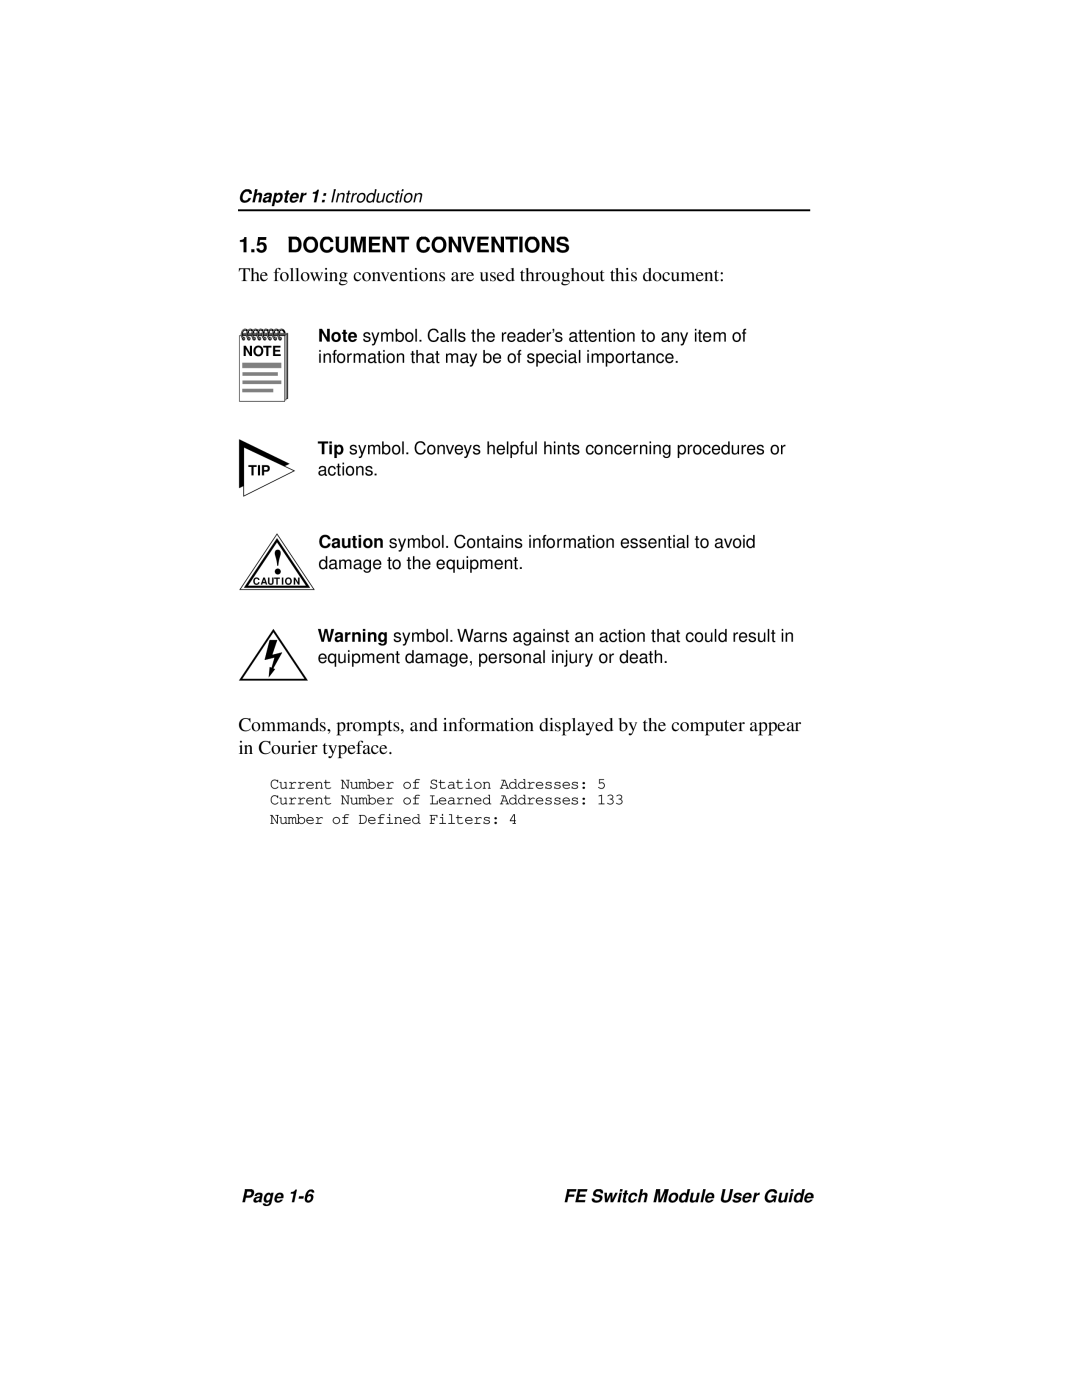 Cabletron Systems 3H02-04 Document Conventions, The following conventions are used throughout this document, Introduction 